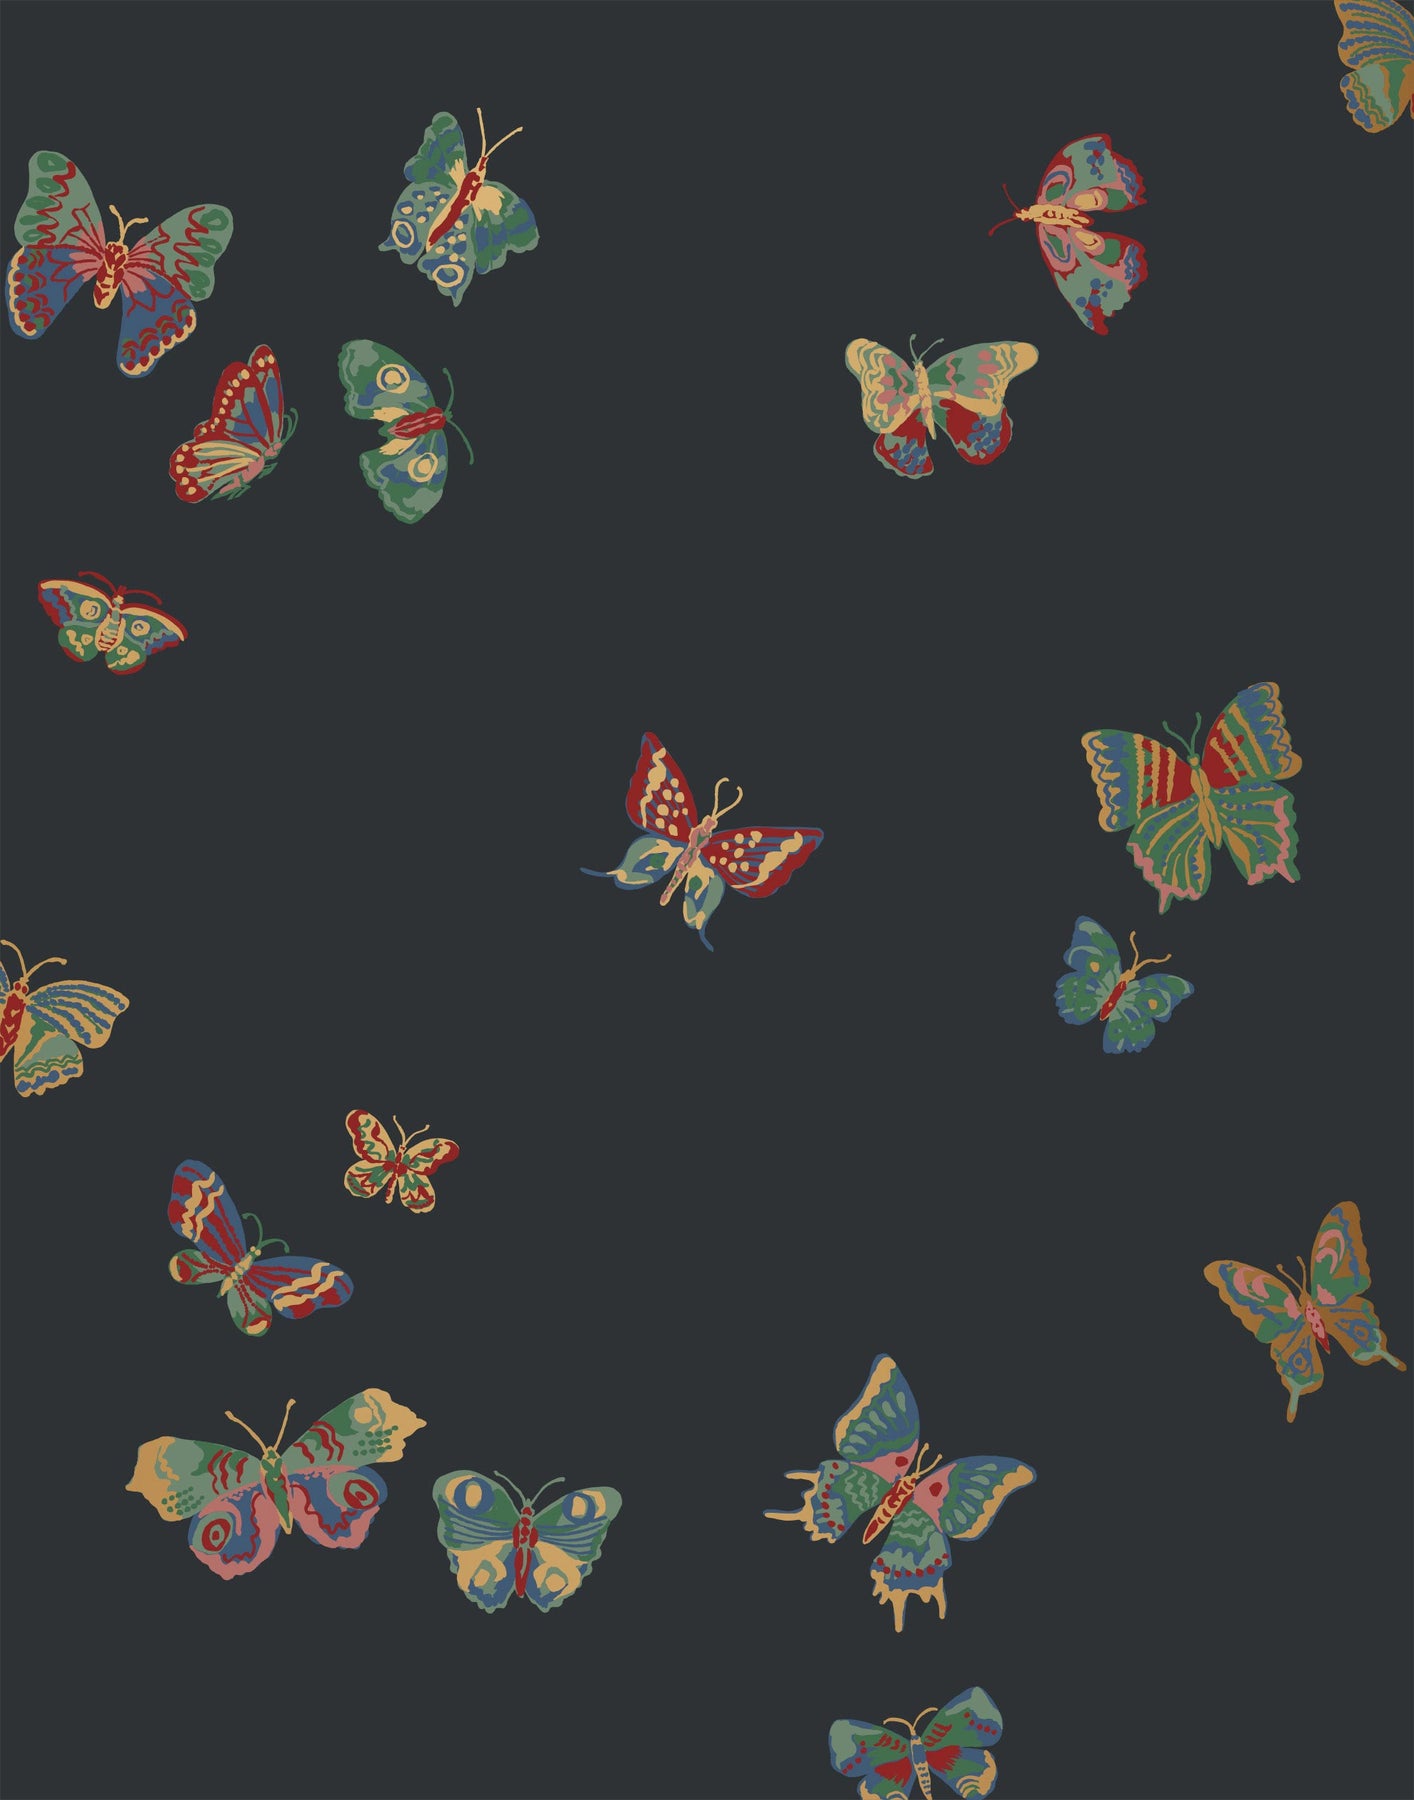 Red And Black Butterfly Wallpapers